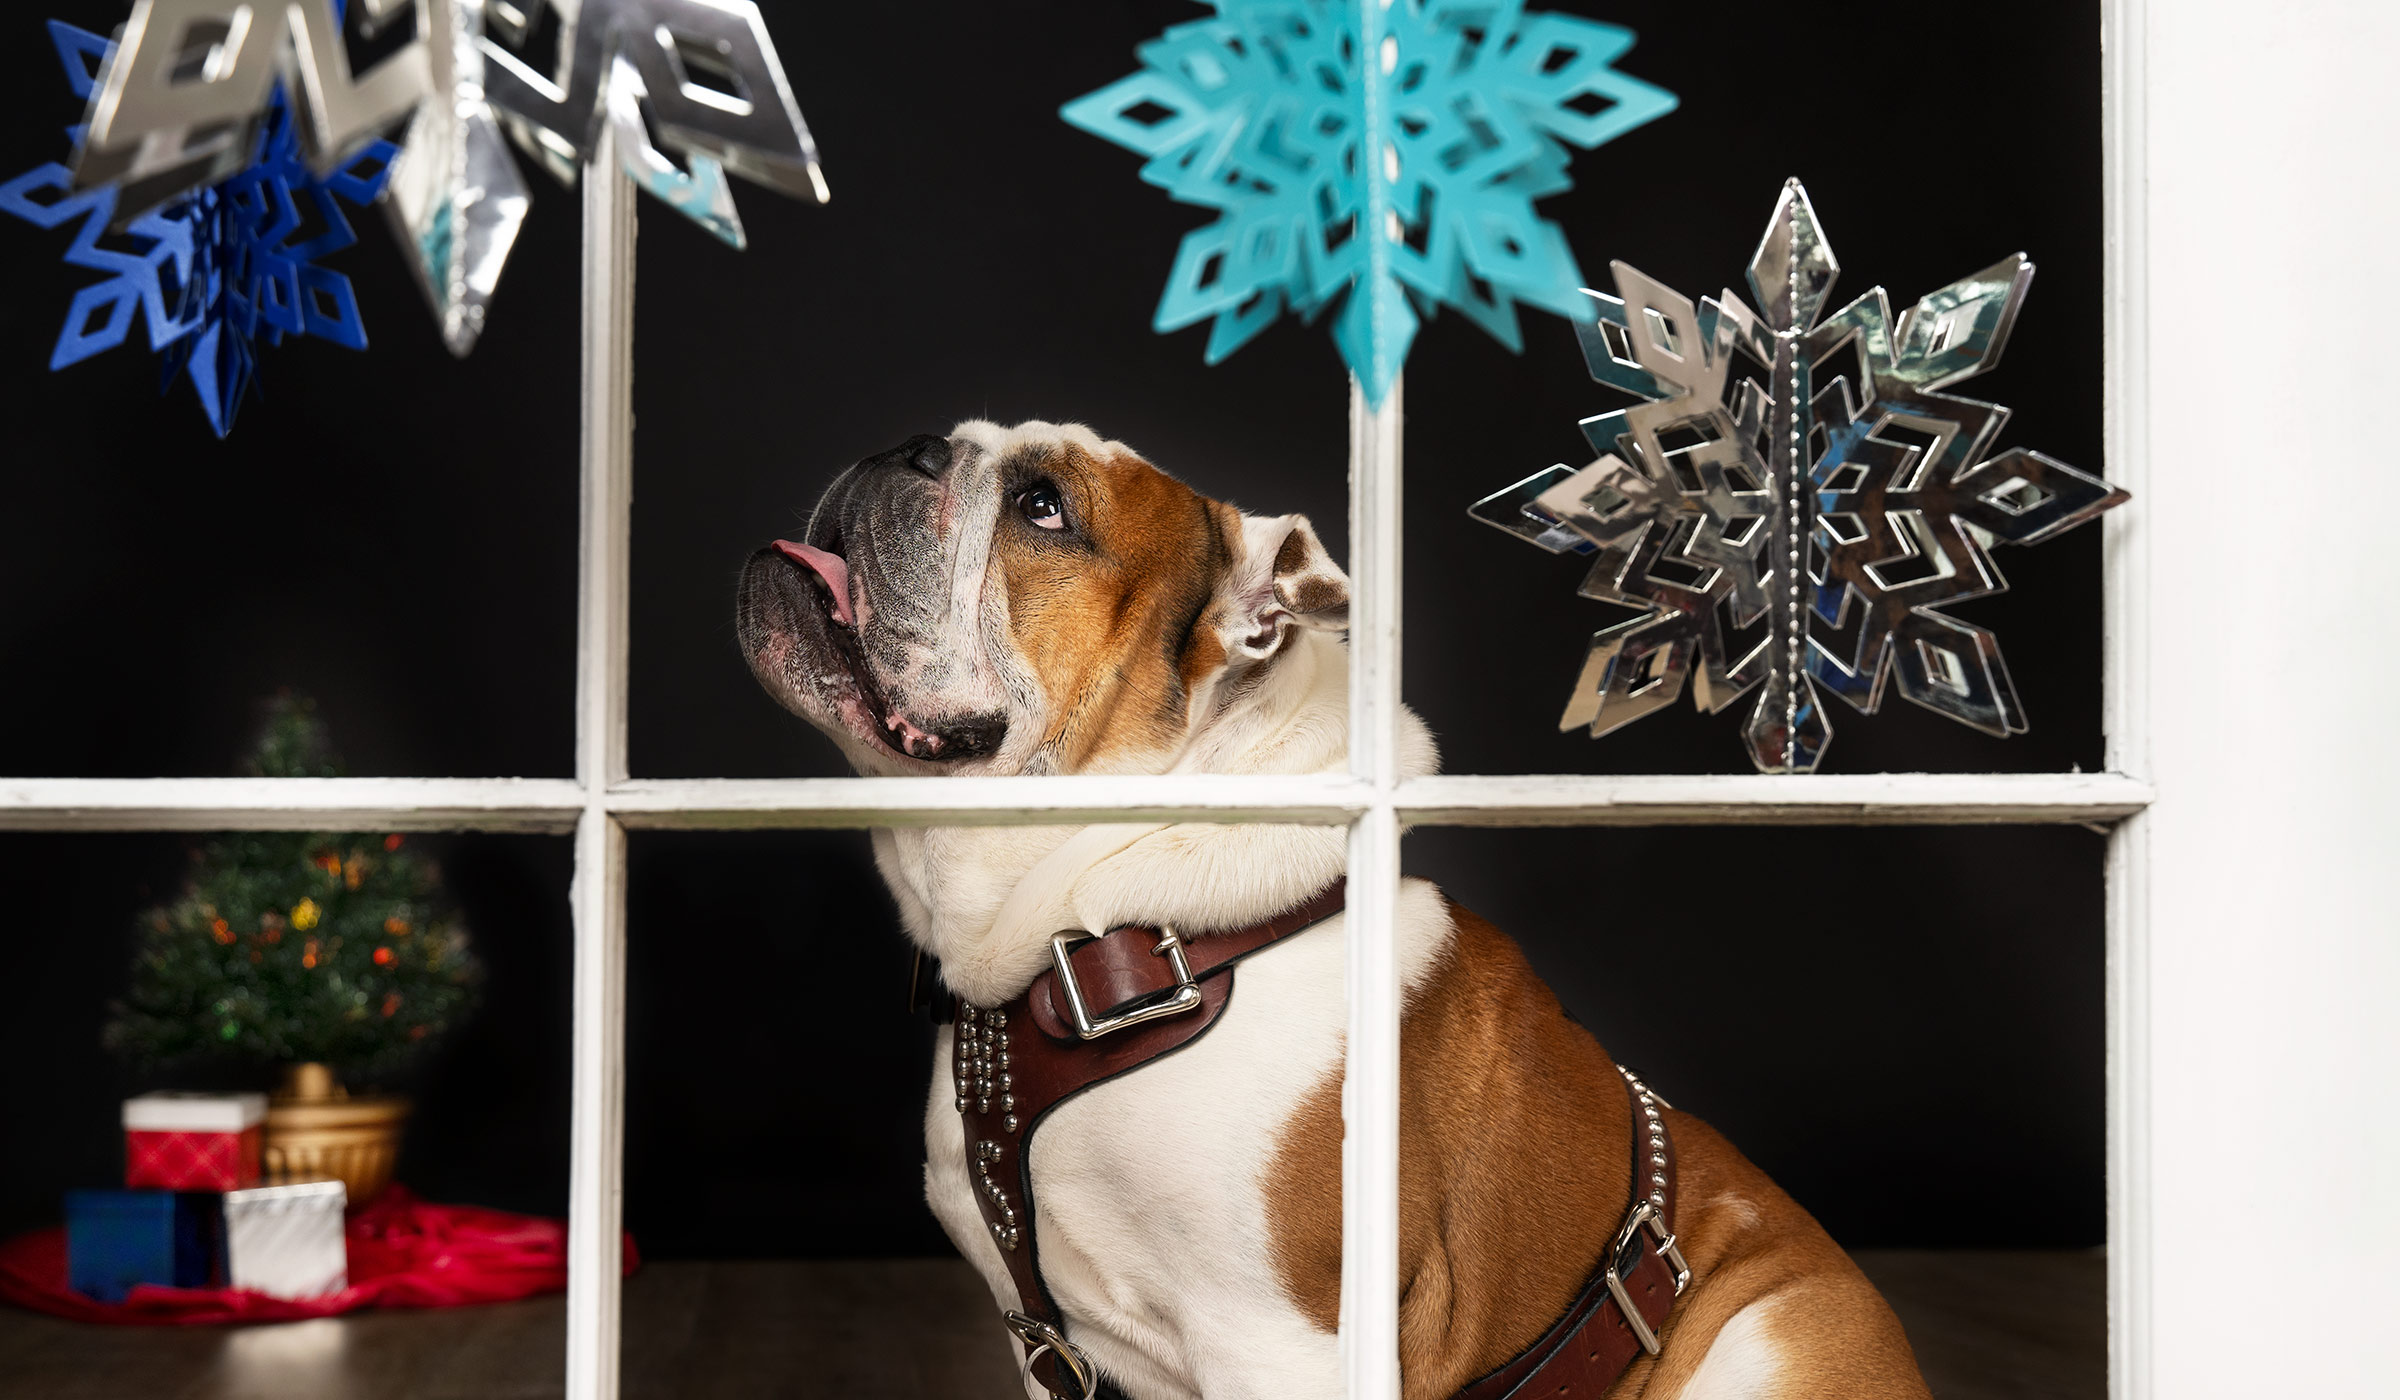 Bulldog sitting behind window with snowflakes small tree with presents